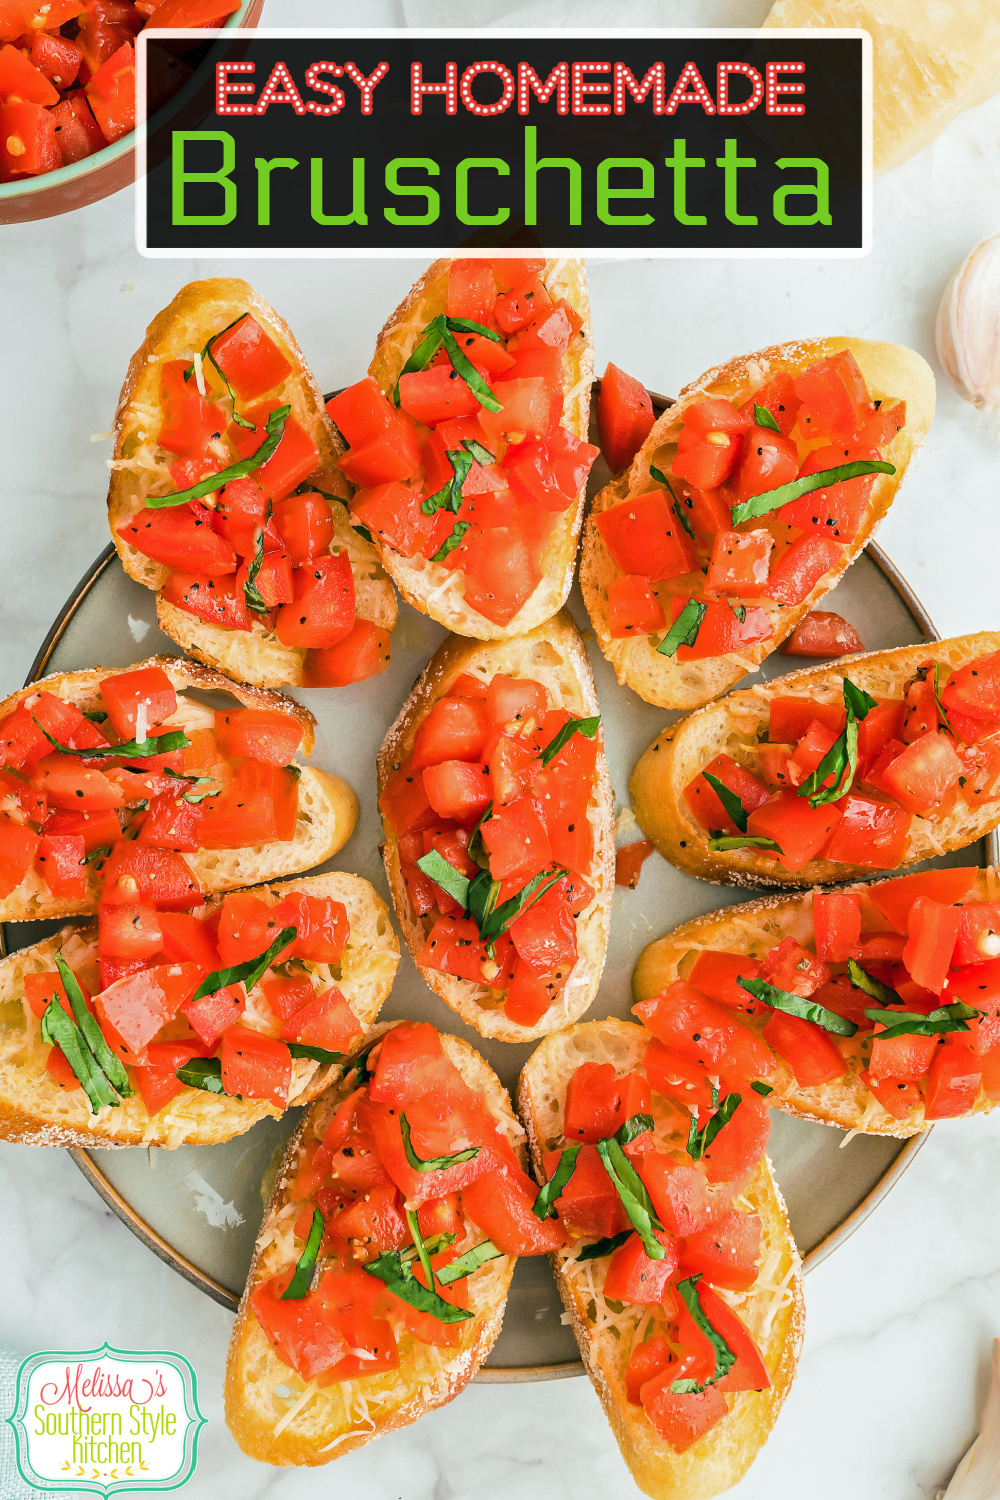 This easy Bruschetta recipe features french bread topped with a mixture of diced tomatoes, garlic, balsamic vinegar and fresh basil. #bruschettarecipe #tomatoes #frenchbread #freshtomatoes #bestbruschettarecipe #easyappetizers #italianrecipes via @melissasssk